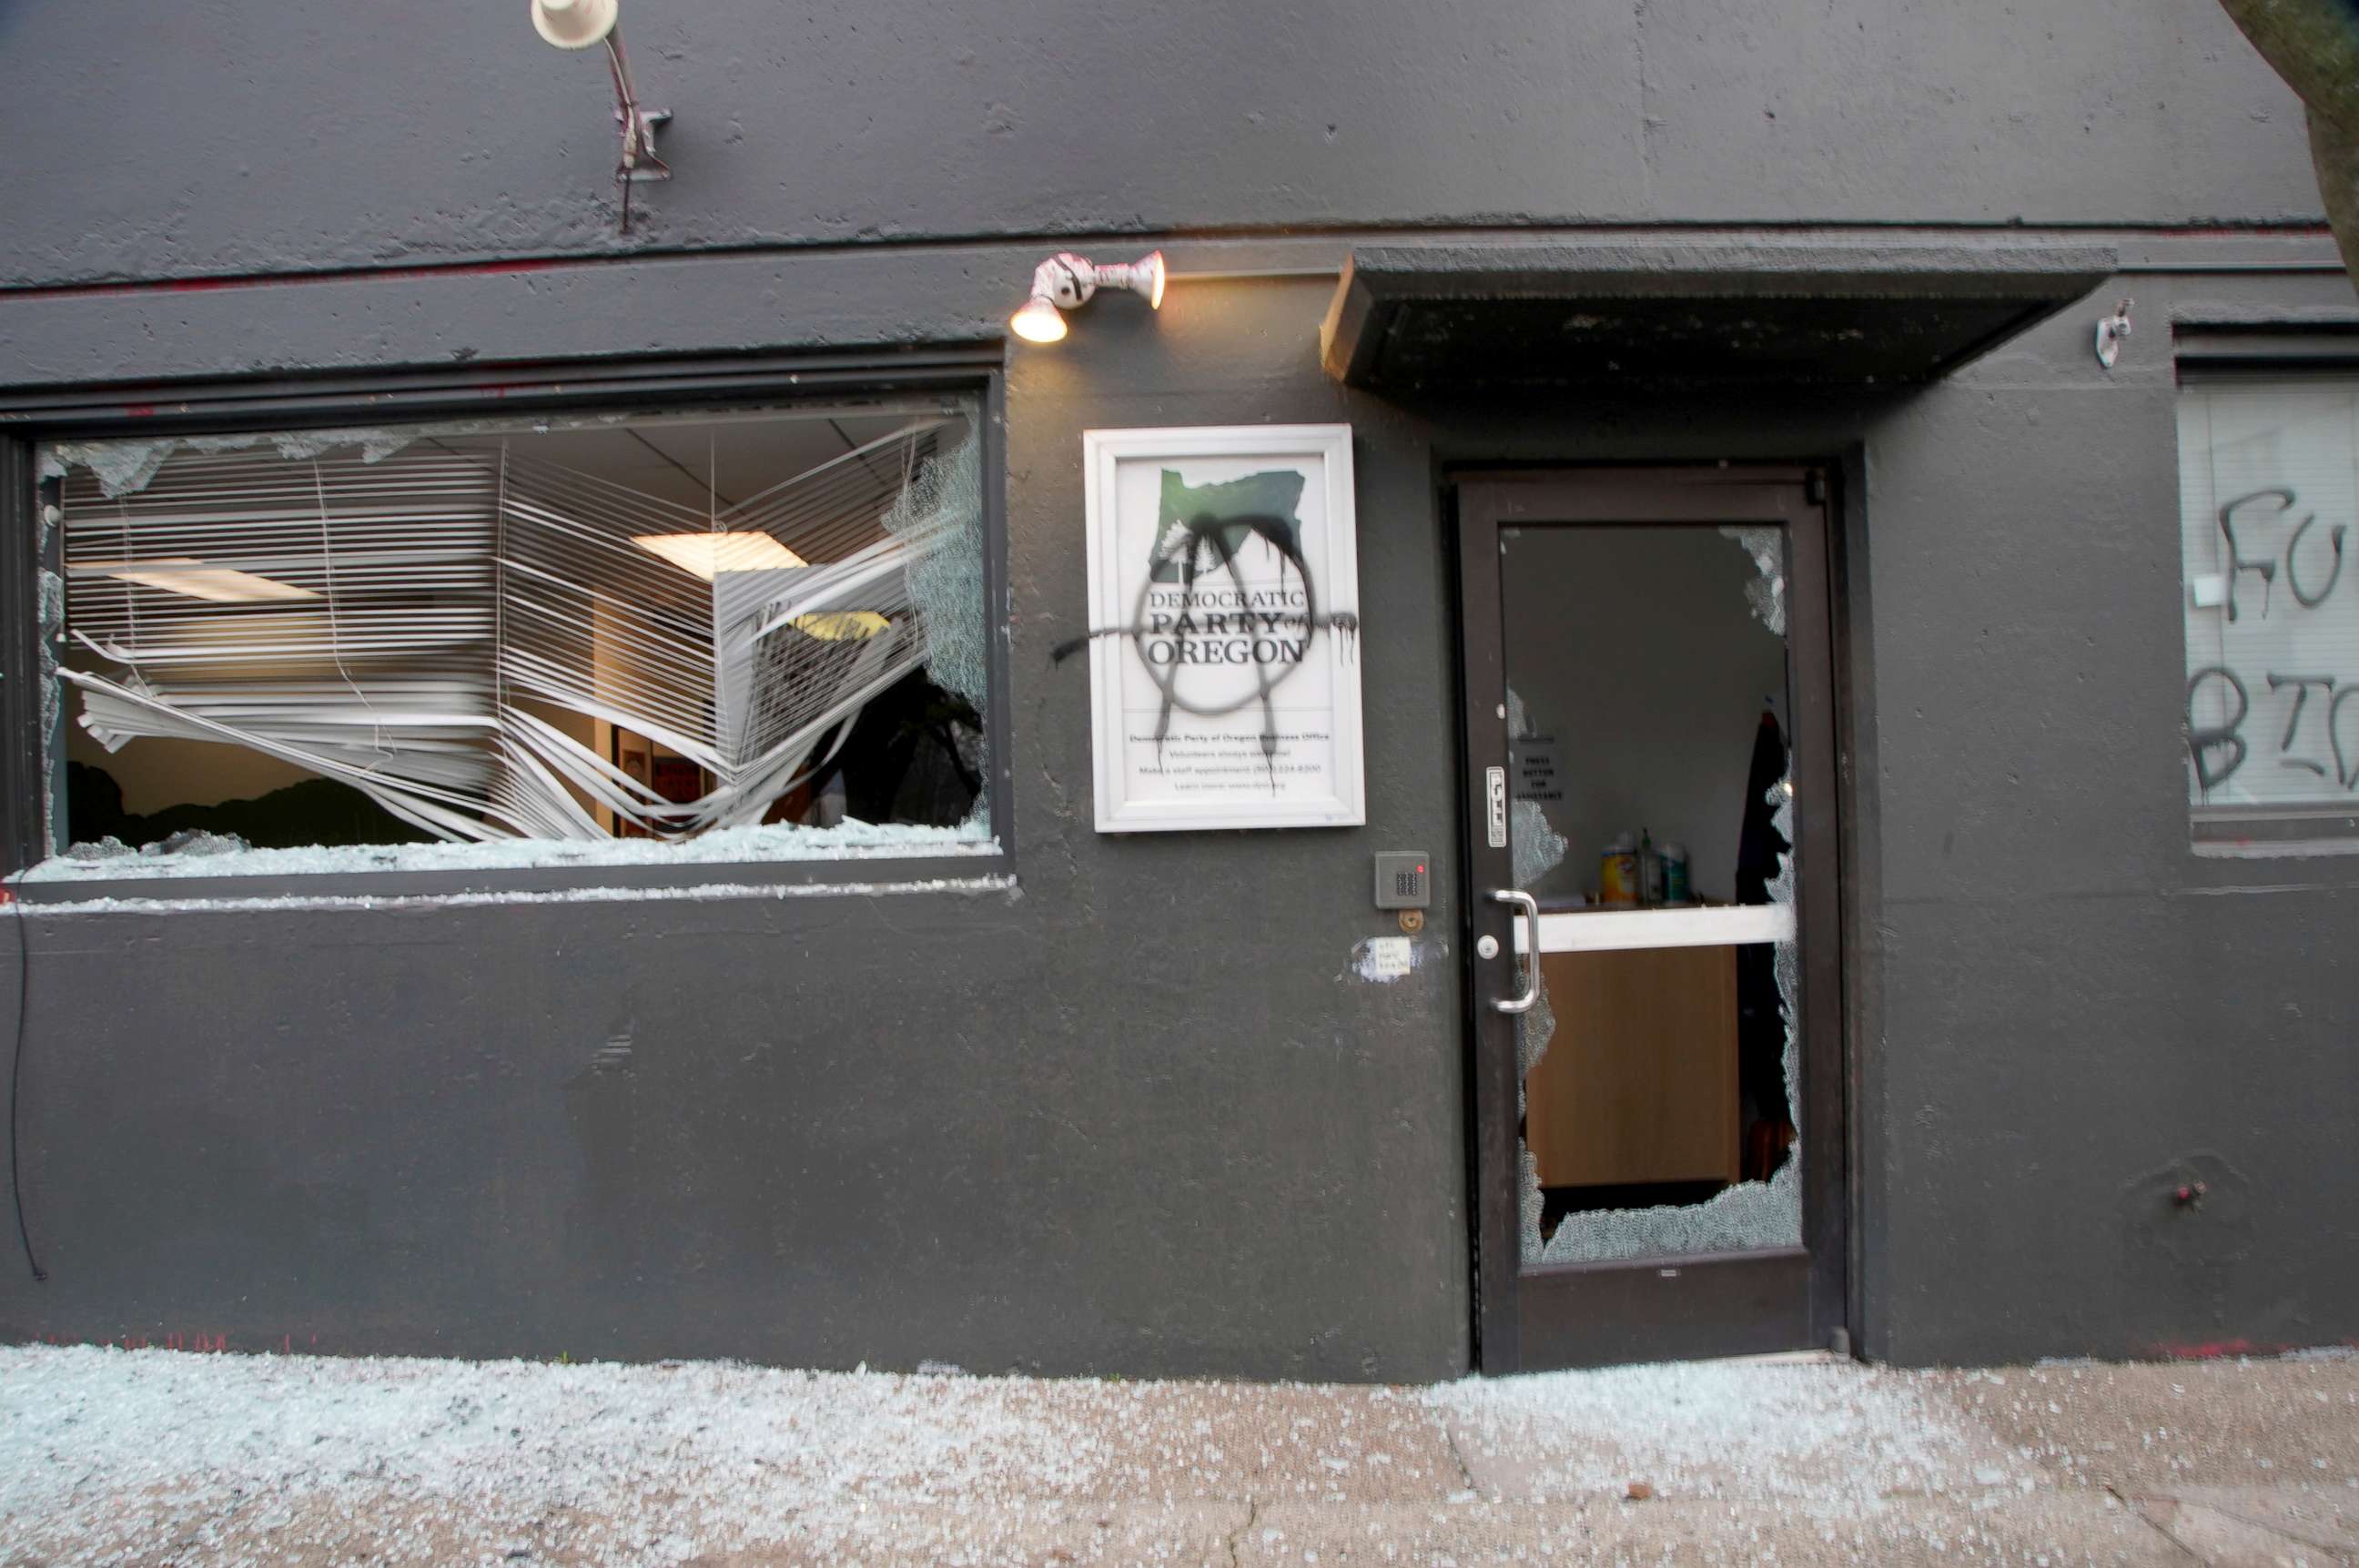 PHOTO: A group of protesters damaged the headquarters of the Democratic Party of Oregon in Portland on Jan. 20, 2021.